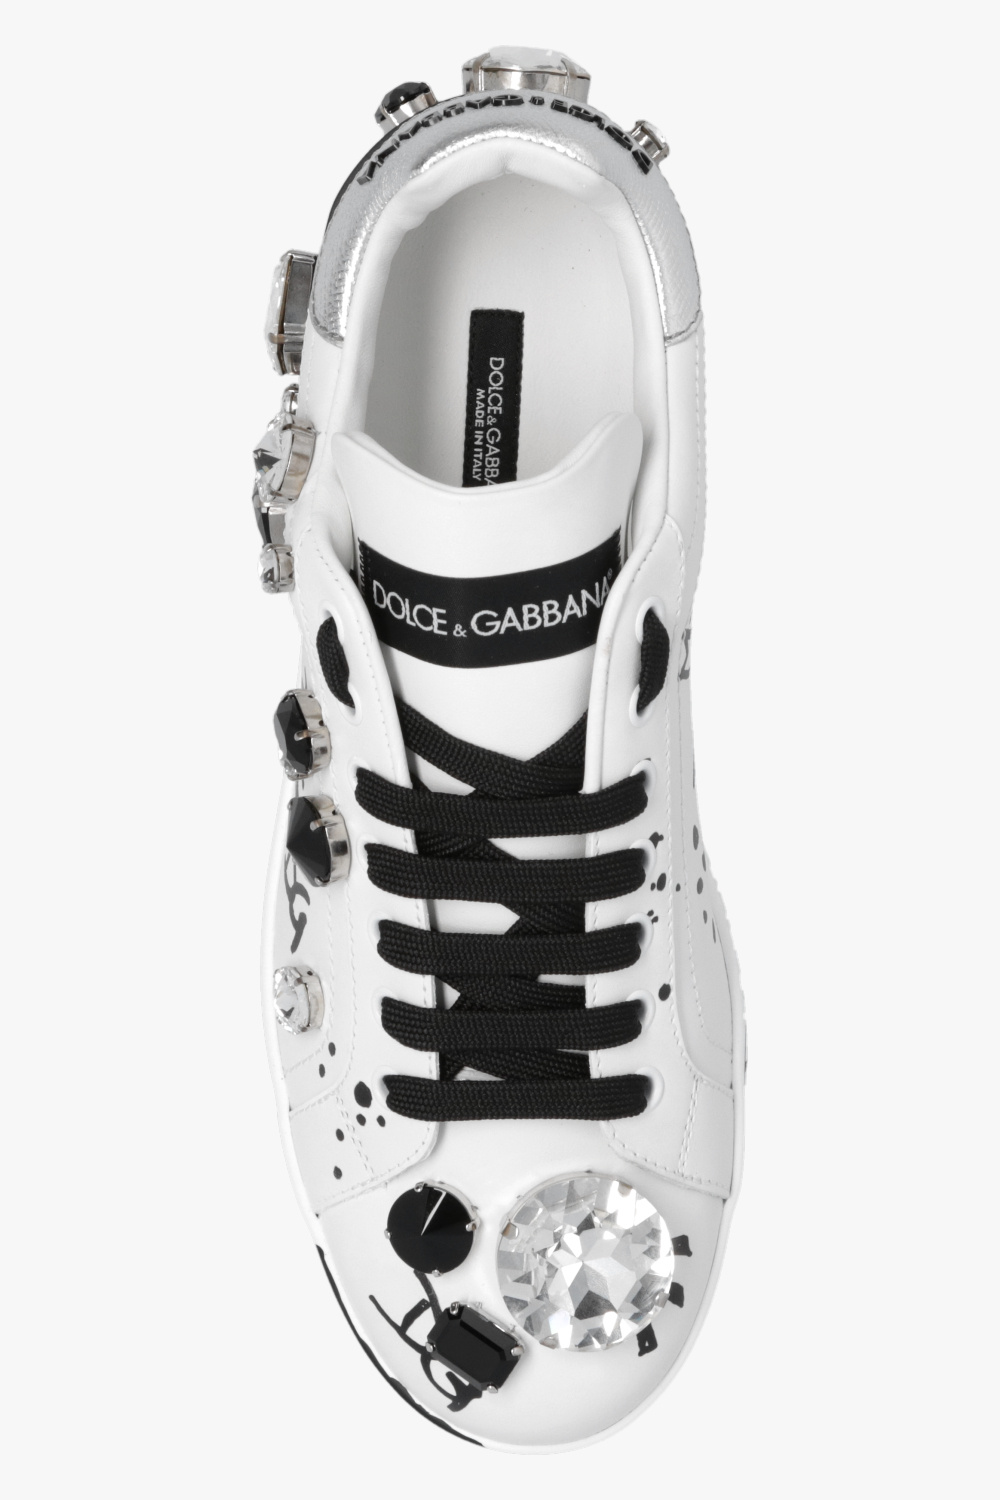 Dolce & Gabbana double-breasted tailored jacket ‘Portofino’ sneakers